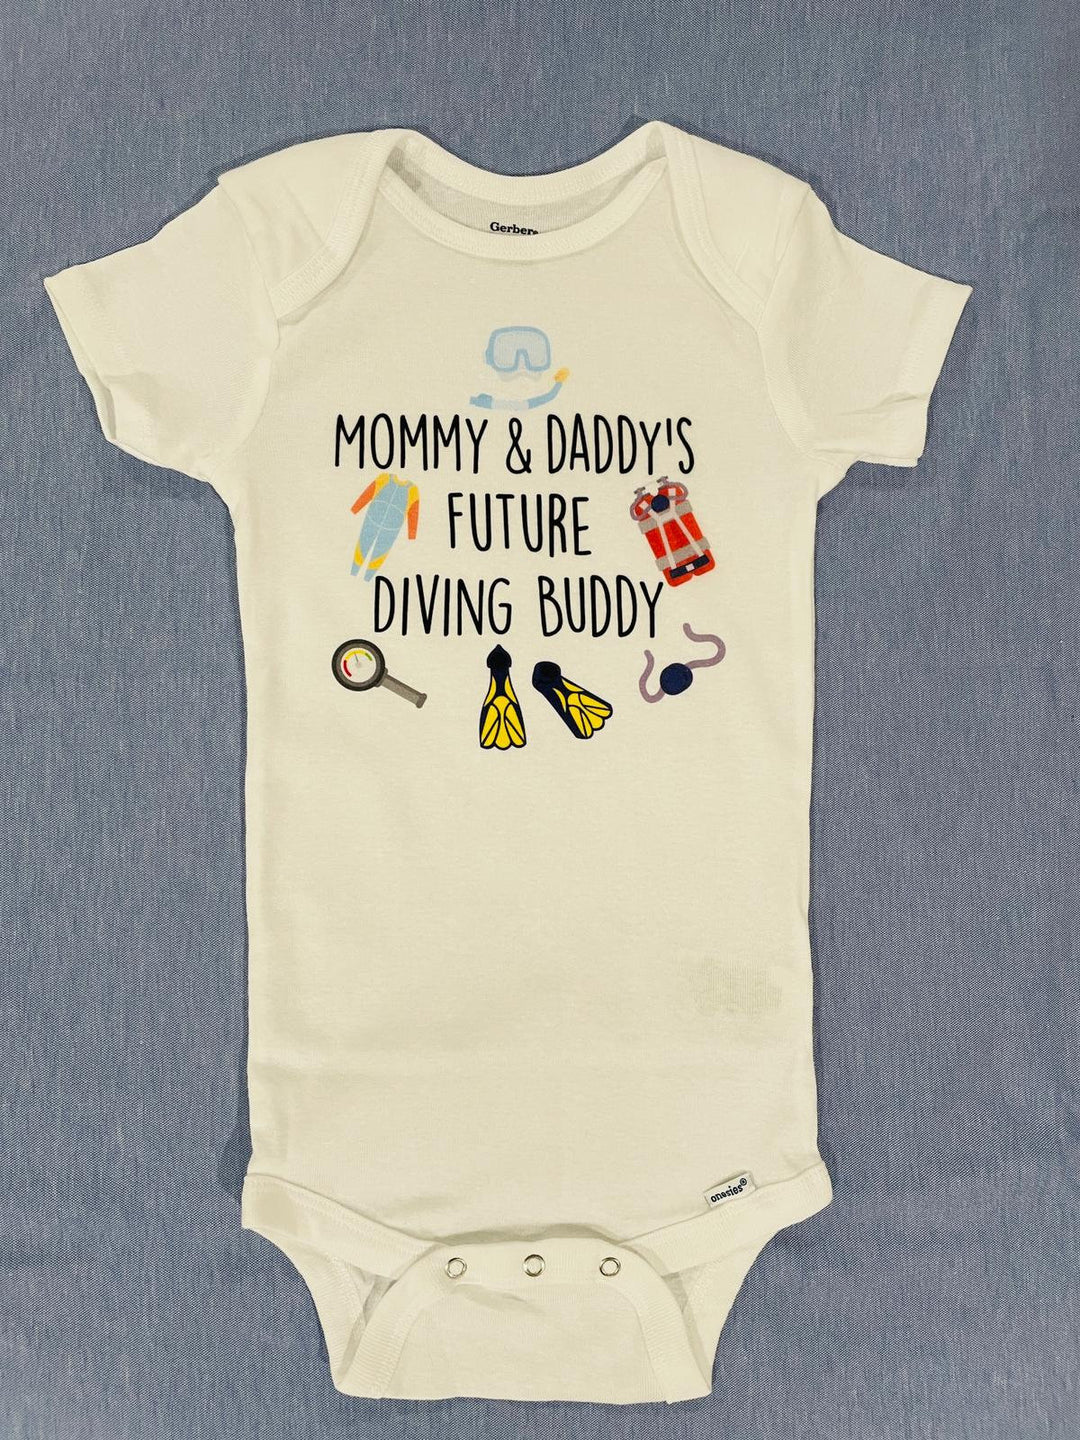 Diving Icons - Baby Boy Girl Clothes Infant Bodysuit Funny Cute Newborn